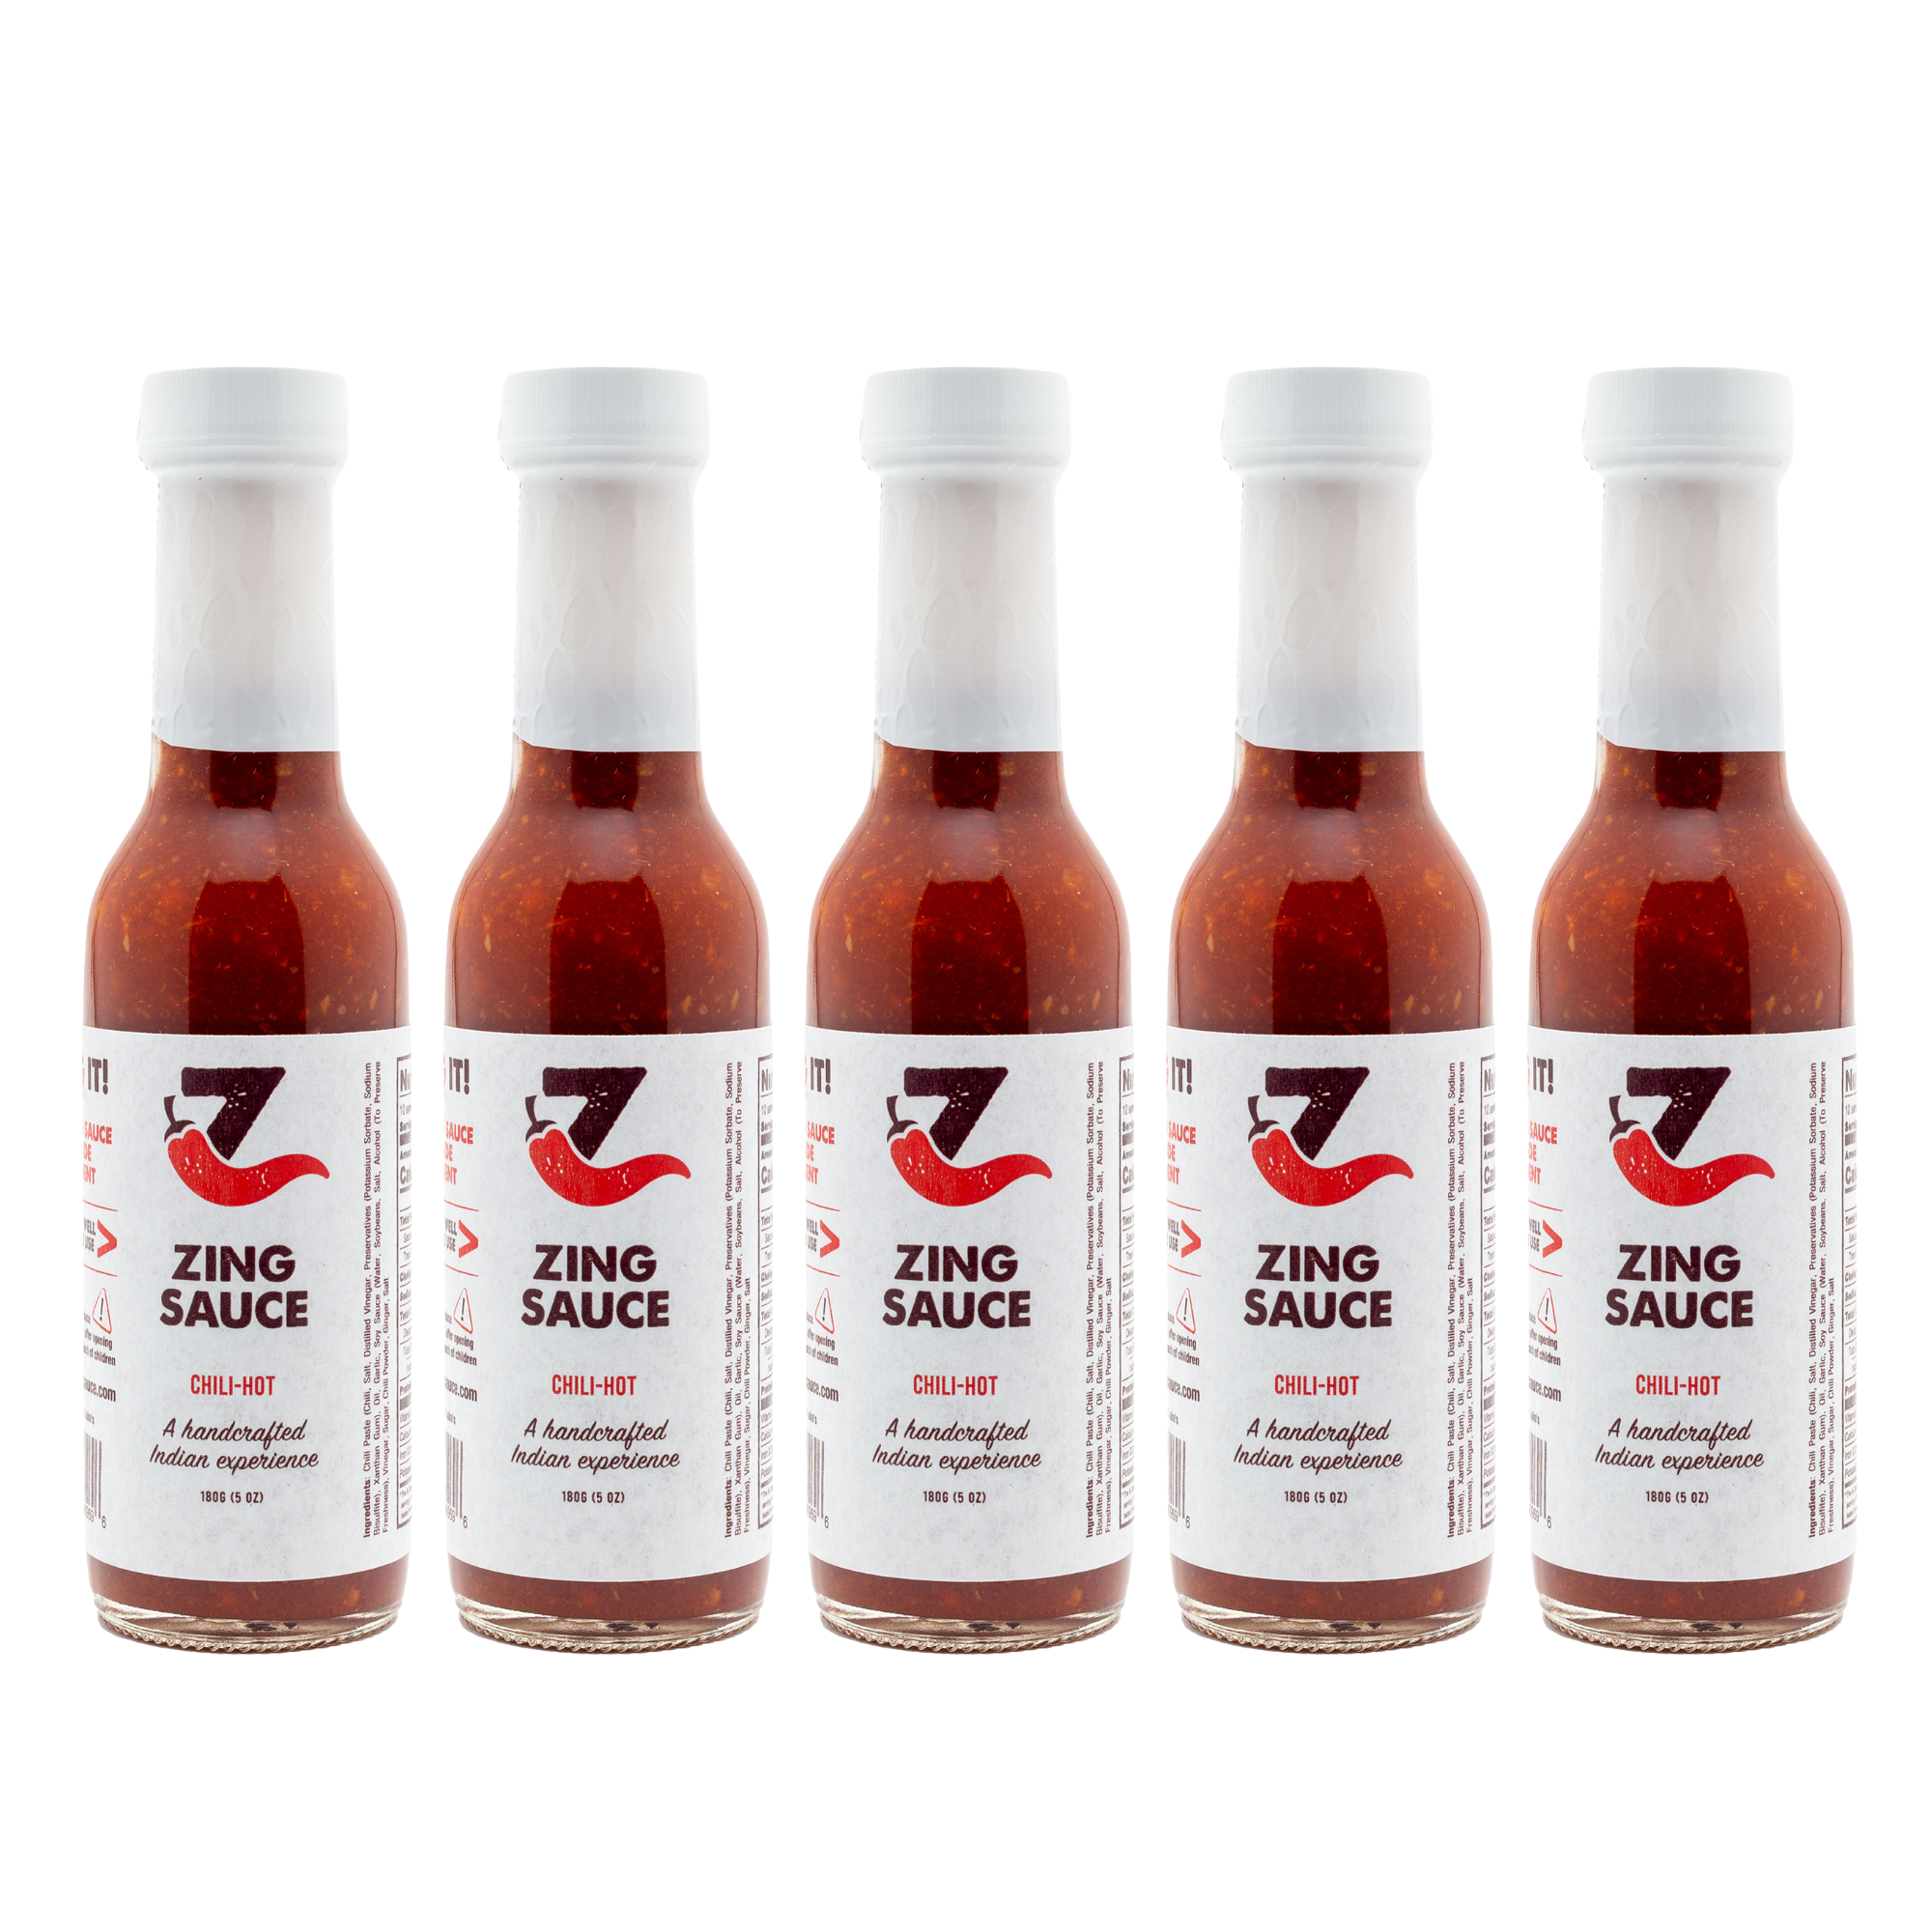 The Zing Sauce Great Tasting Hot Indian Chili Garlic Sauce - 5 Count  [Price Includes Shipping]